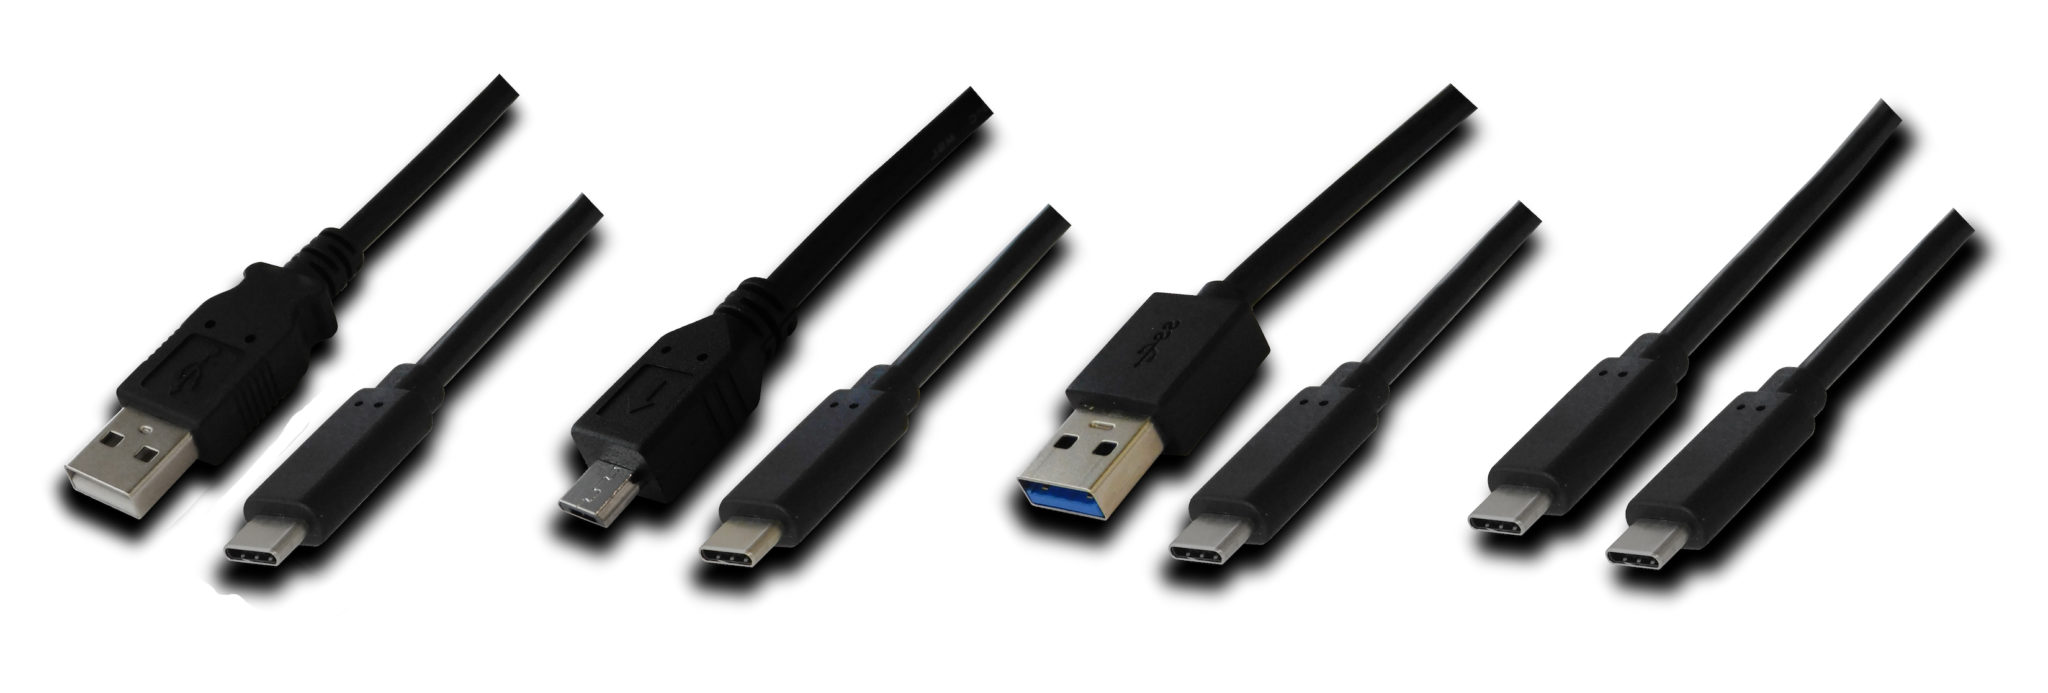 Stewart Connector’s new USB Type-C cable assemblies